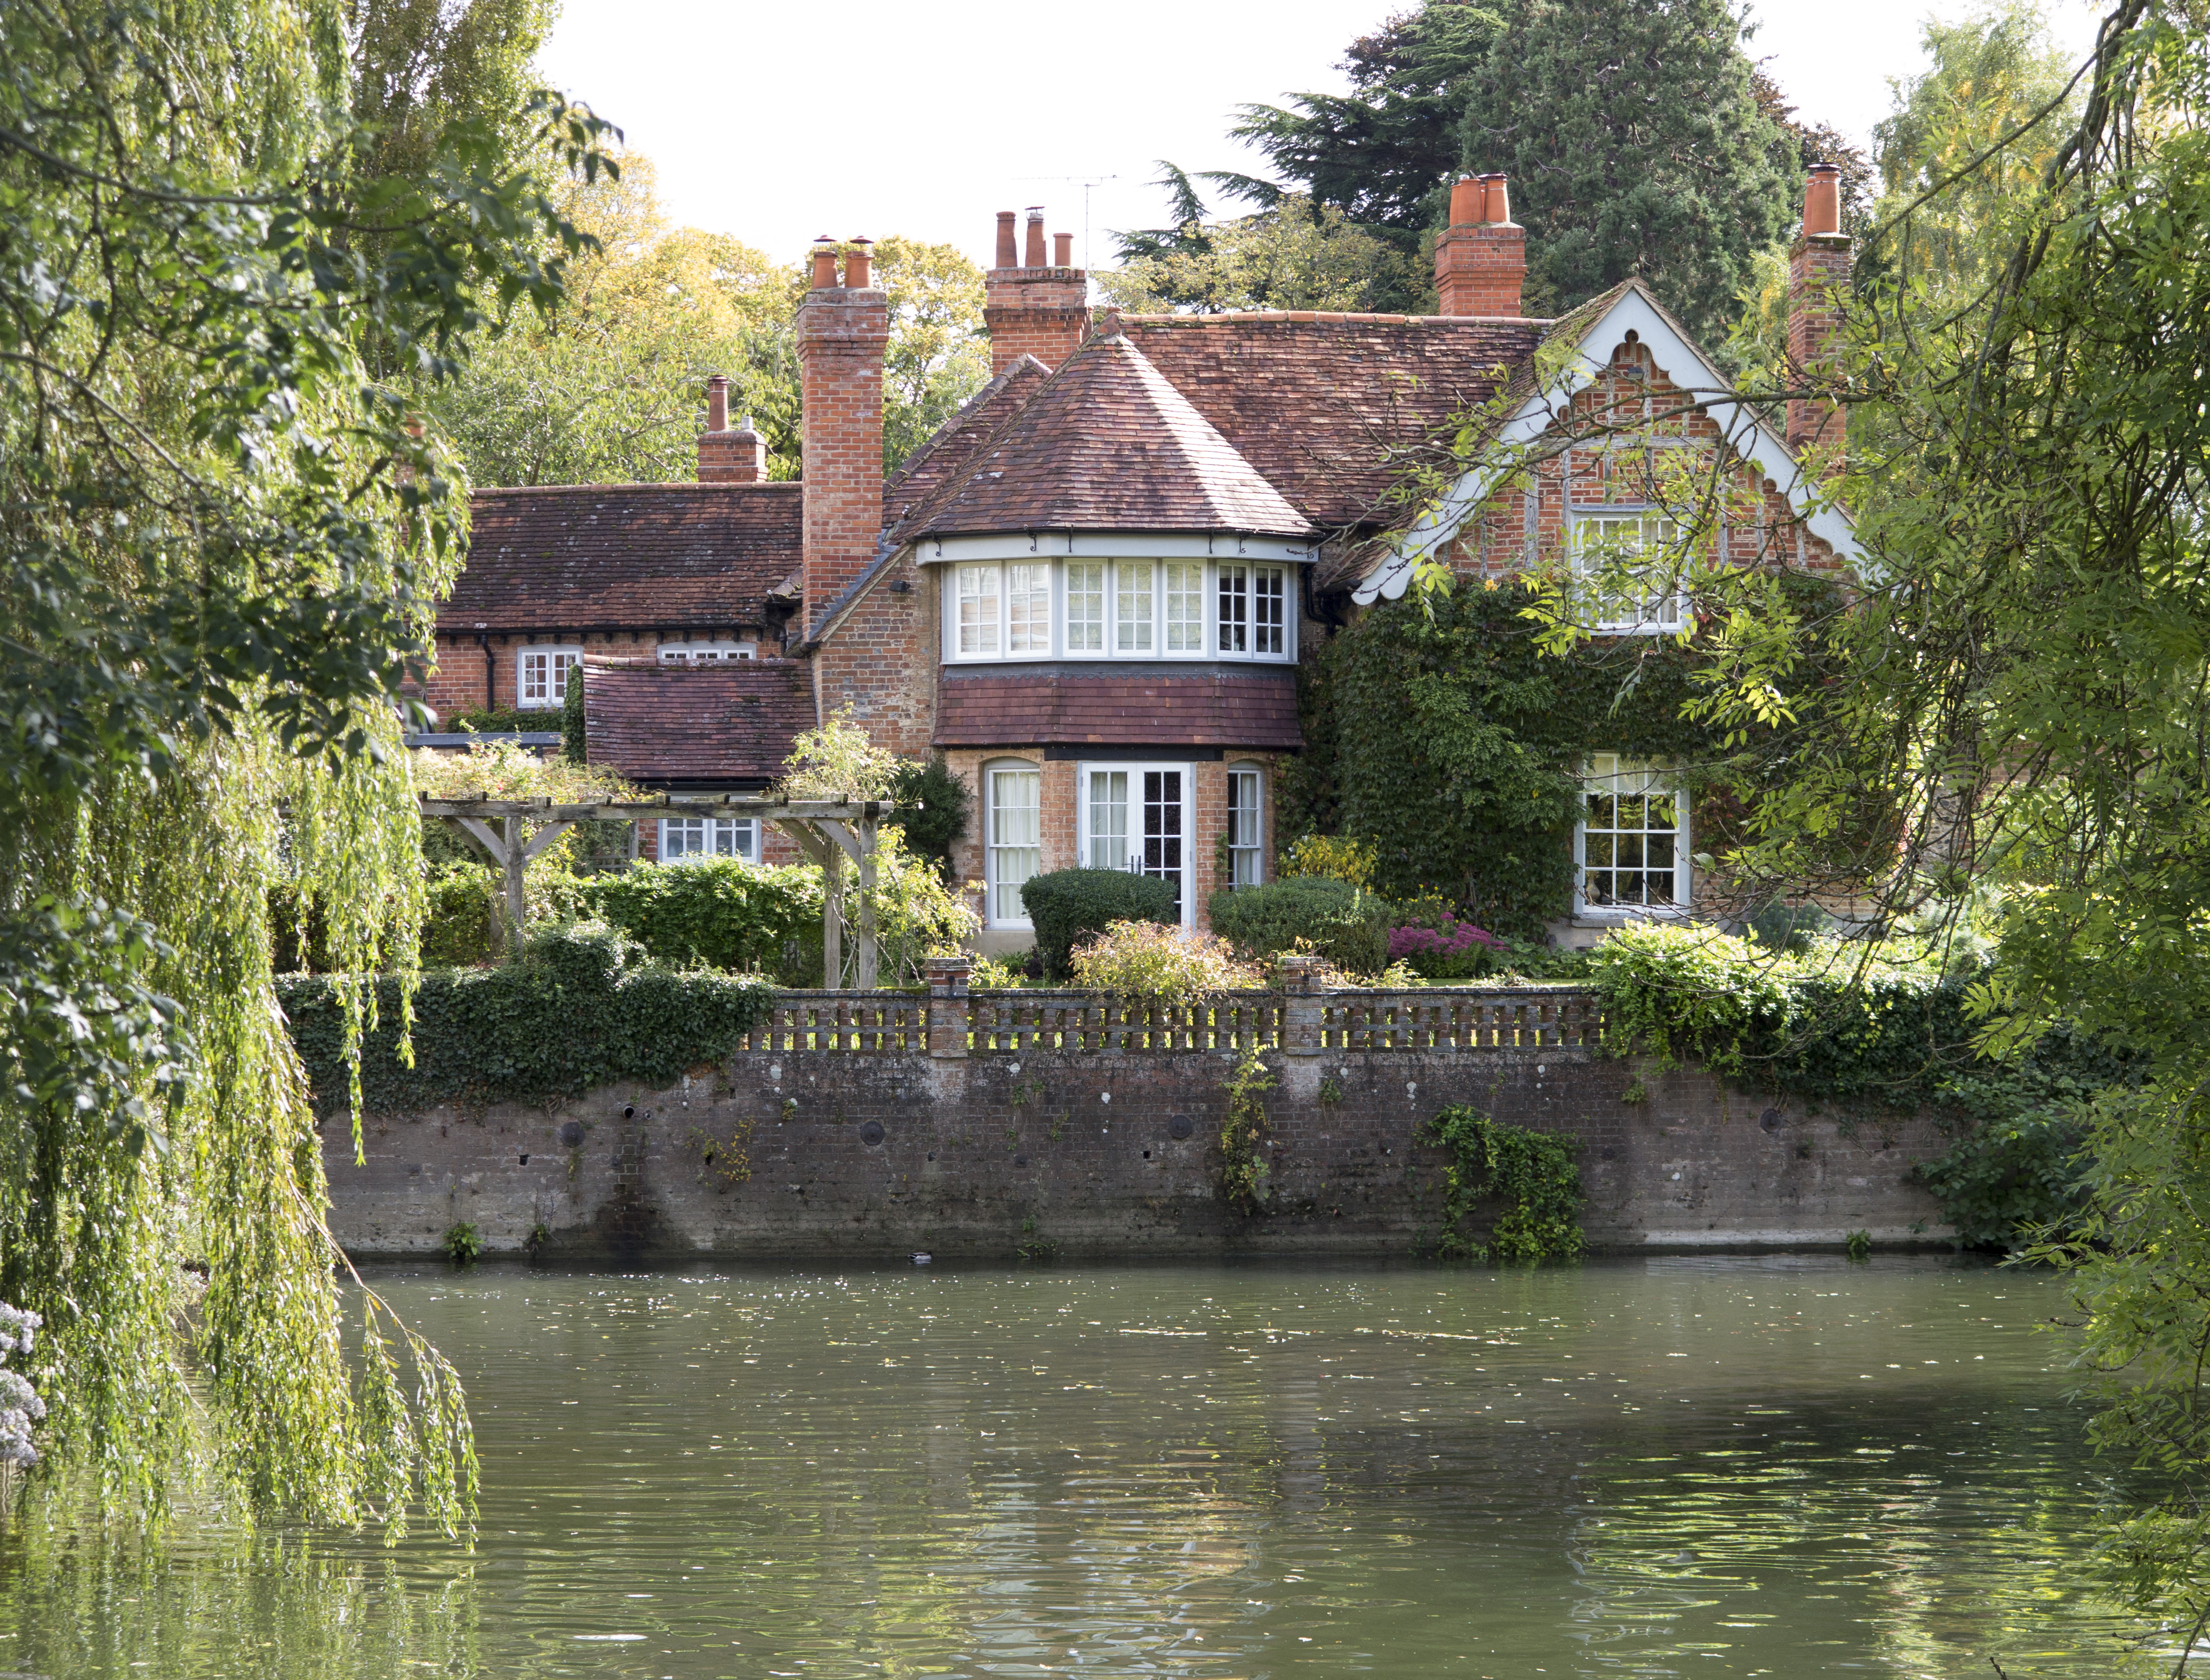 George spent much of his time at this home in Goring, Berkshire, and later died there in 2019